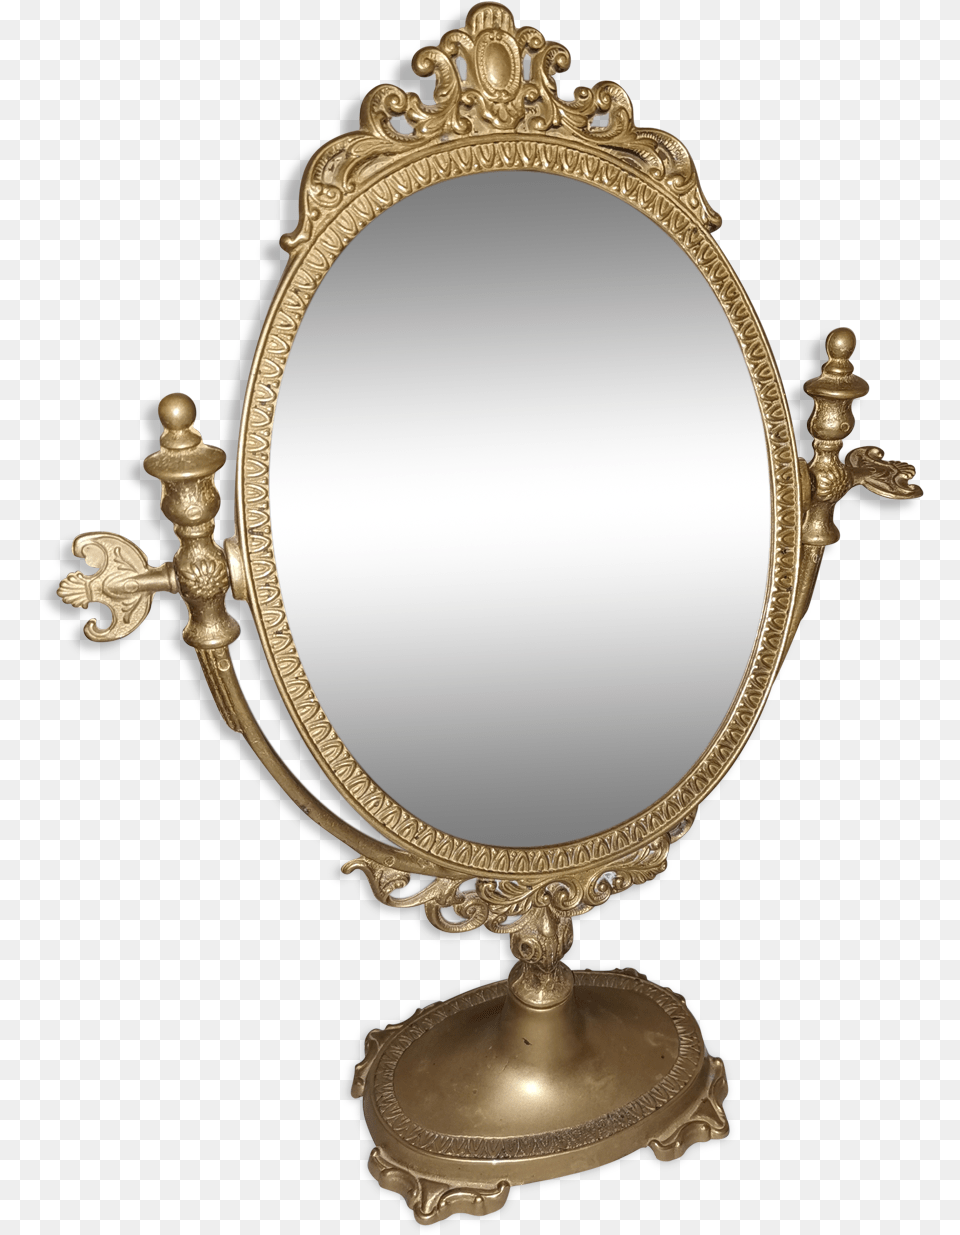 Old Standing Mirror Swivelling 28x39cmsrc Https Miroir Pivotant Ancien, Photography Png Image